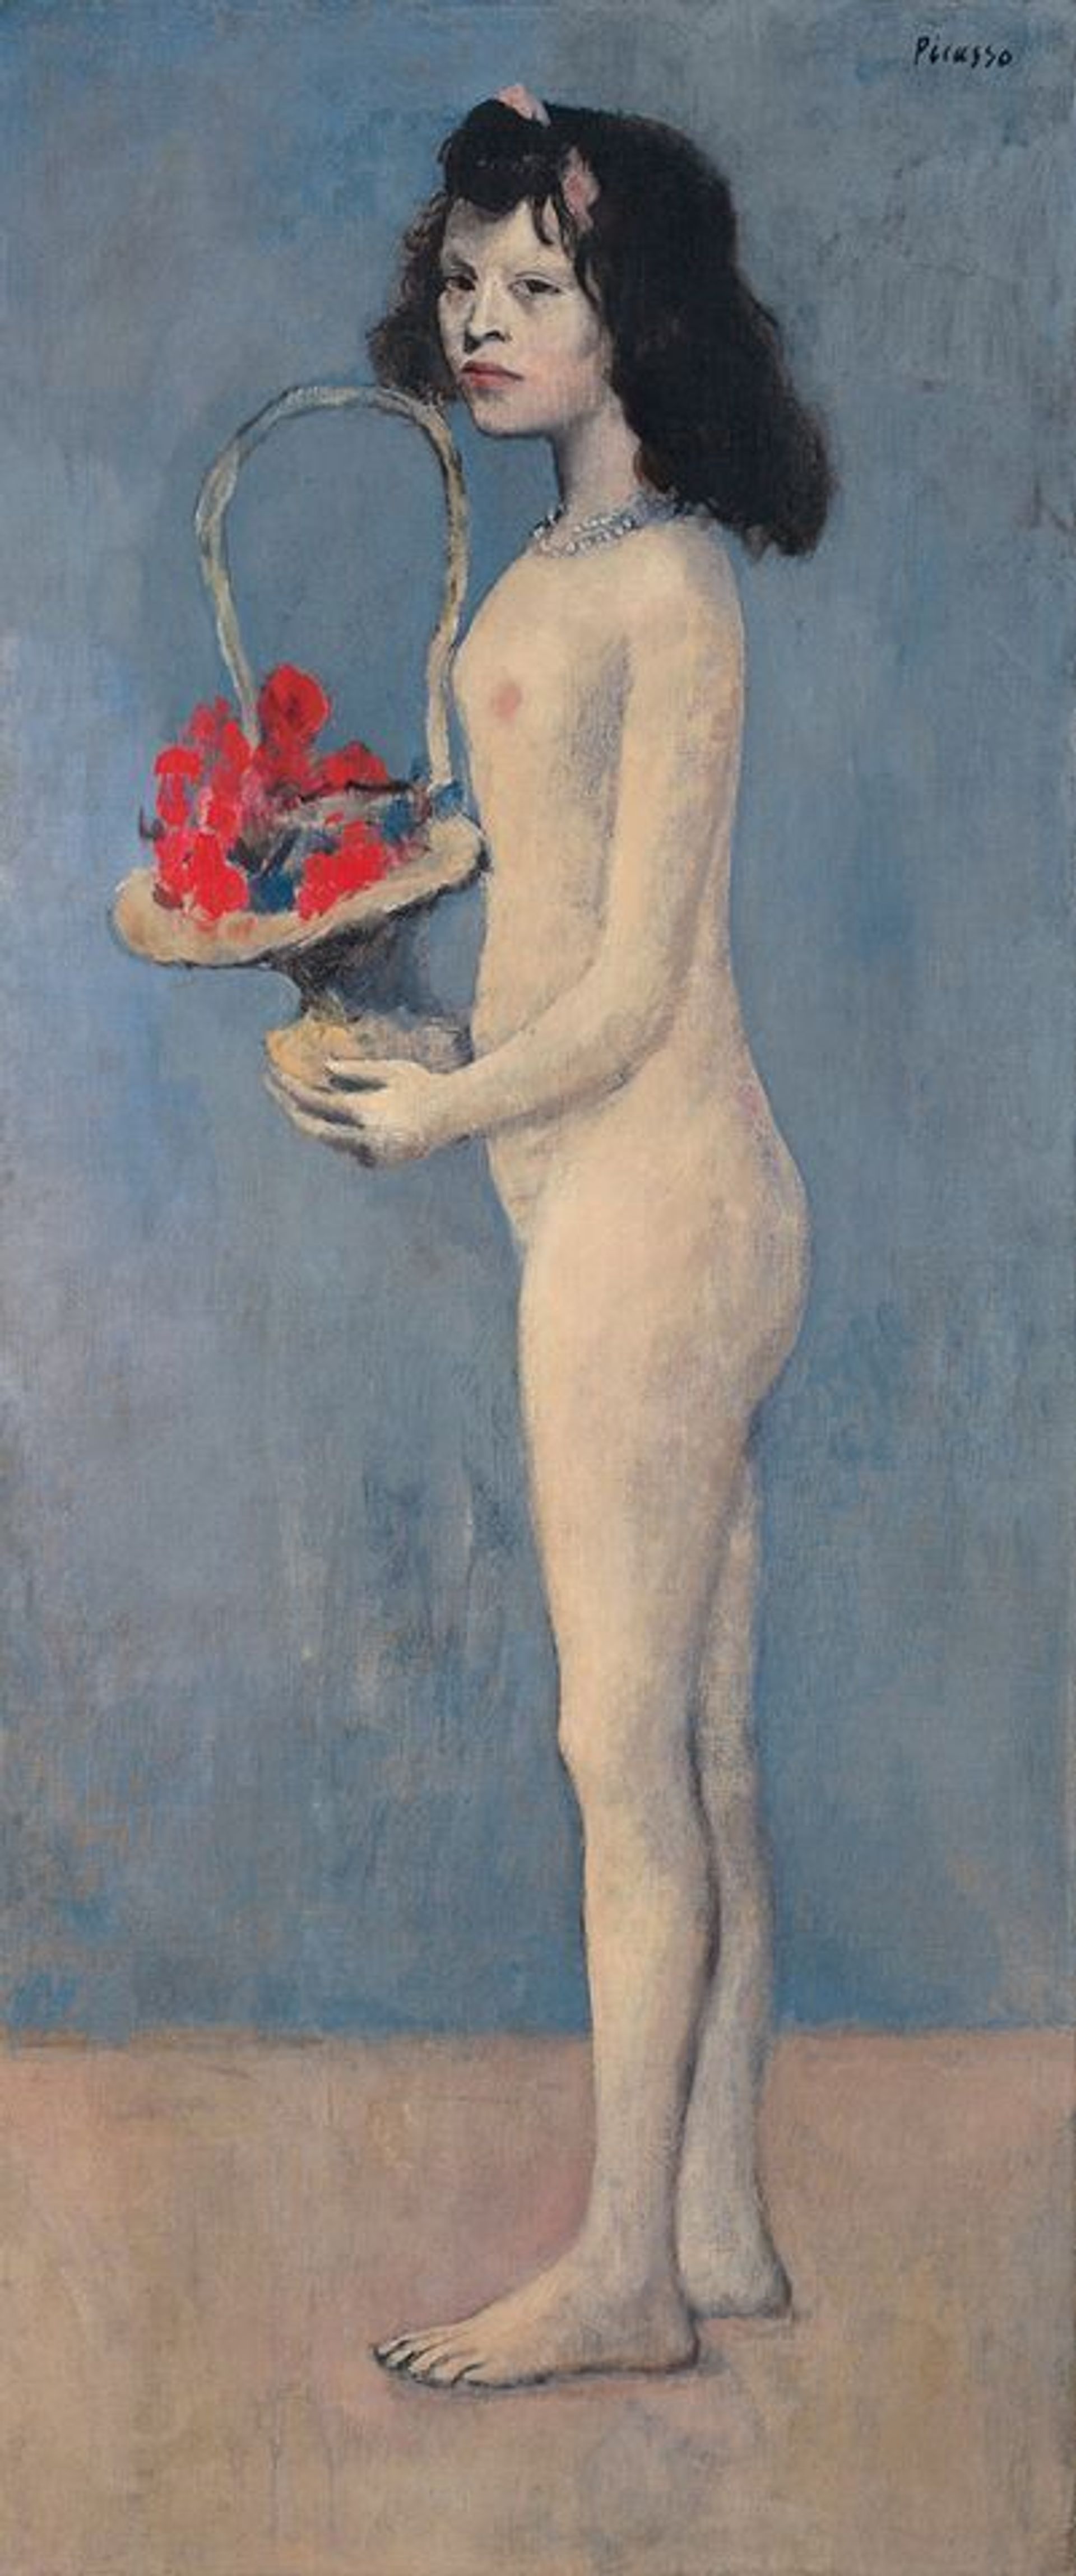 Picasso’s Fillette à la corbeille fleurie (Young Girl with a Flower Basket, 1905) Christie's Images